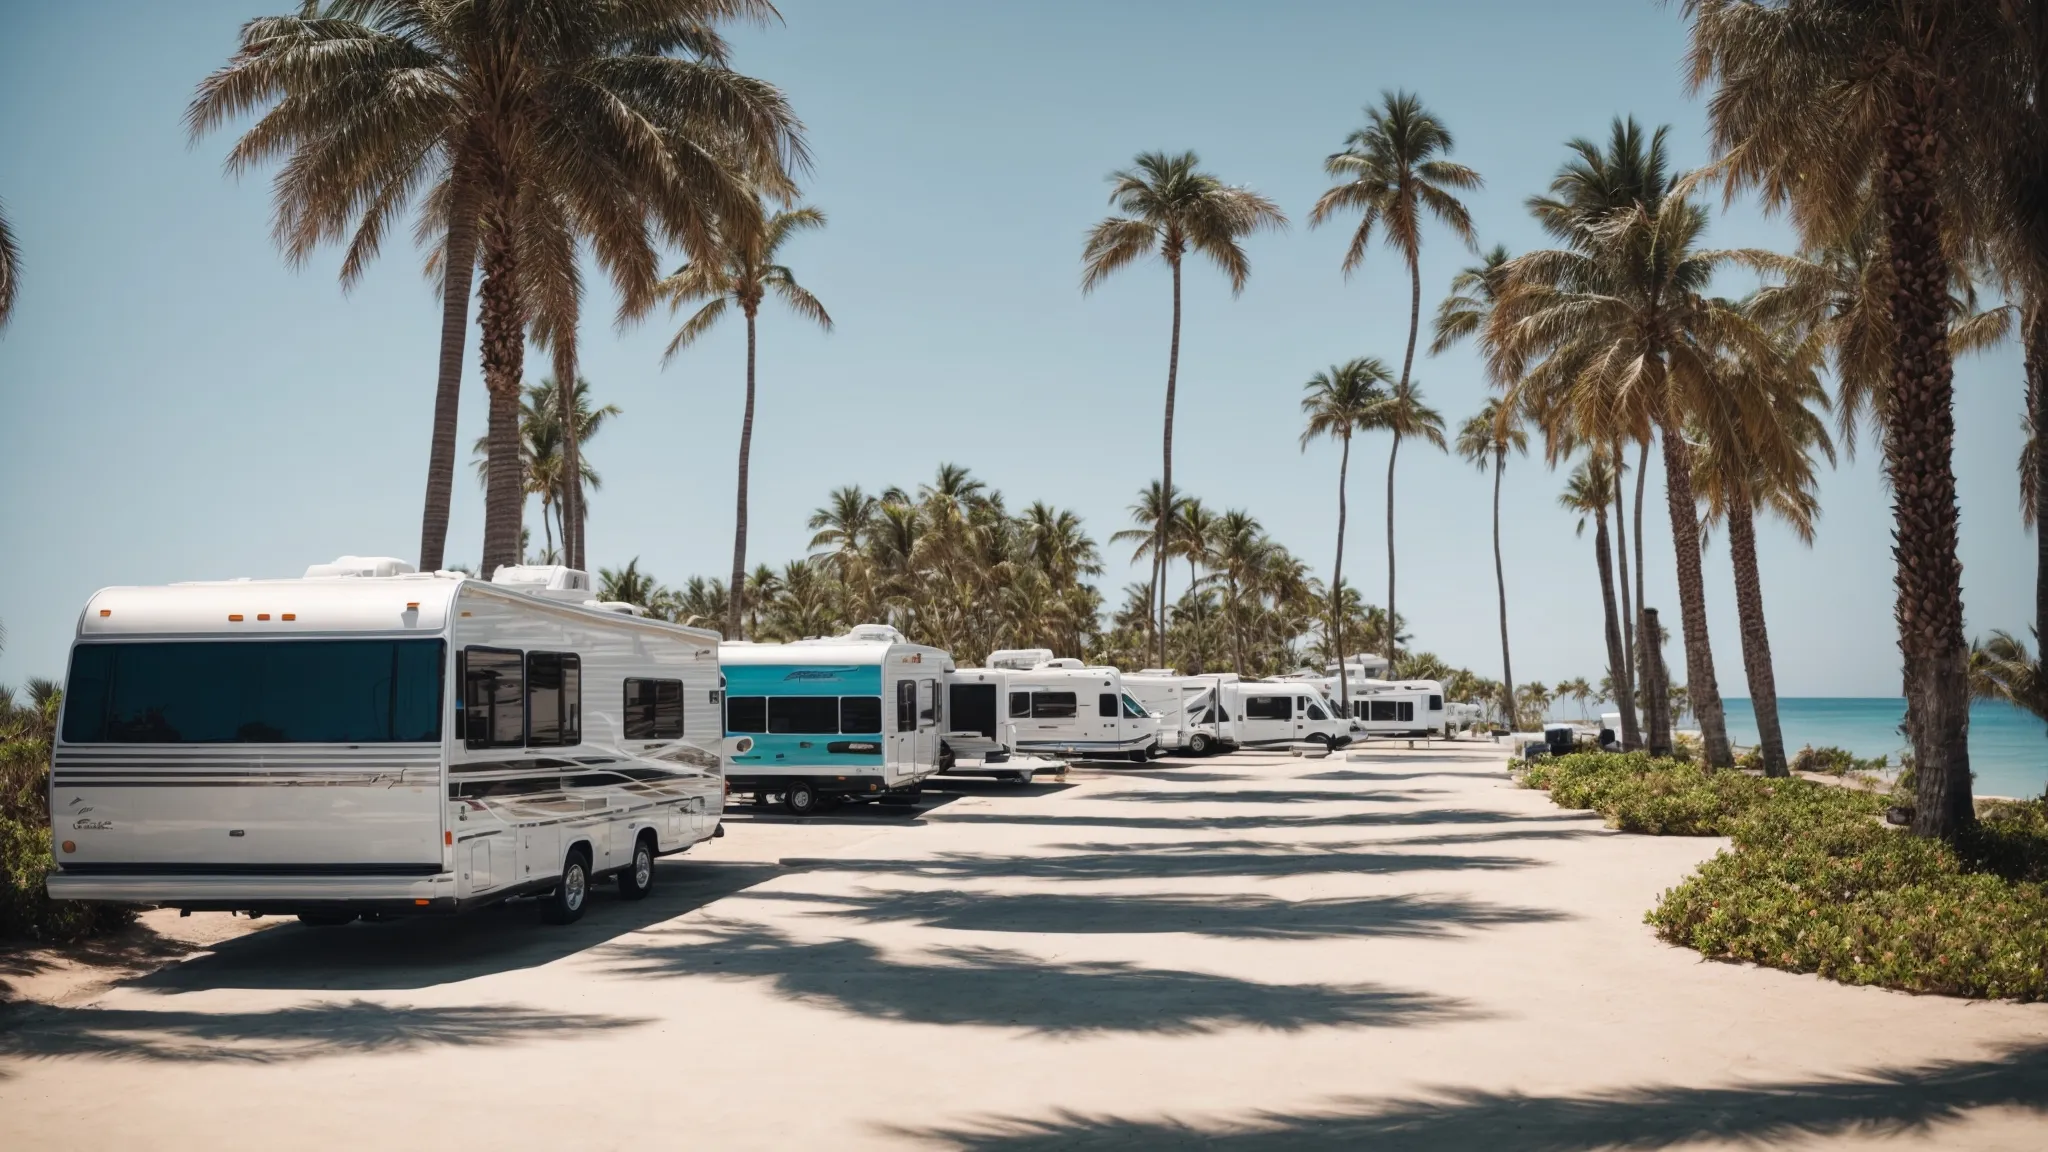 rvs parked amidst palm trees with a view of the ocean under a clear blue sky.